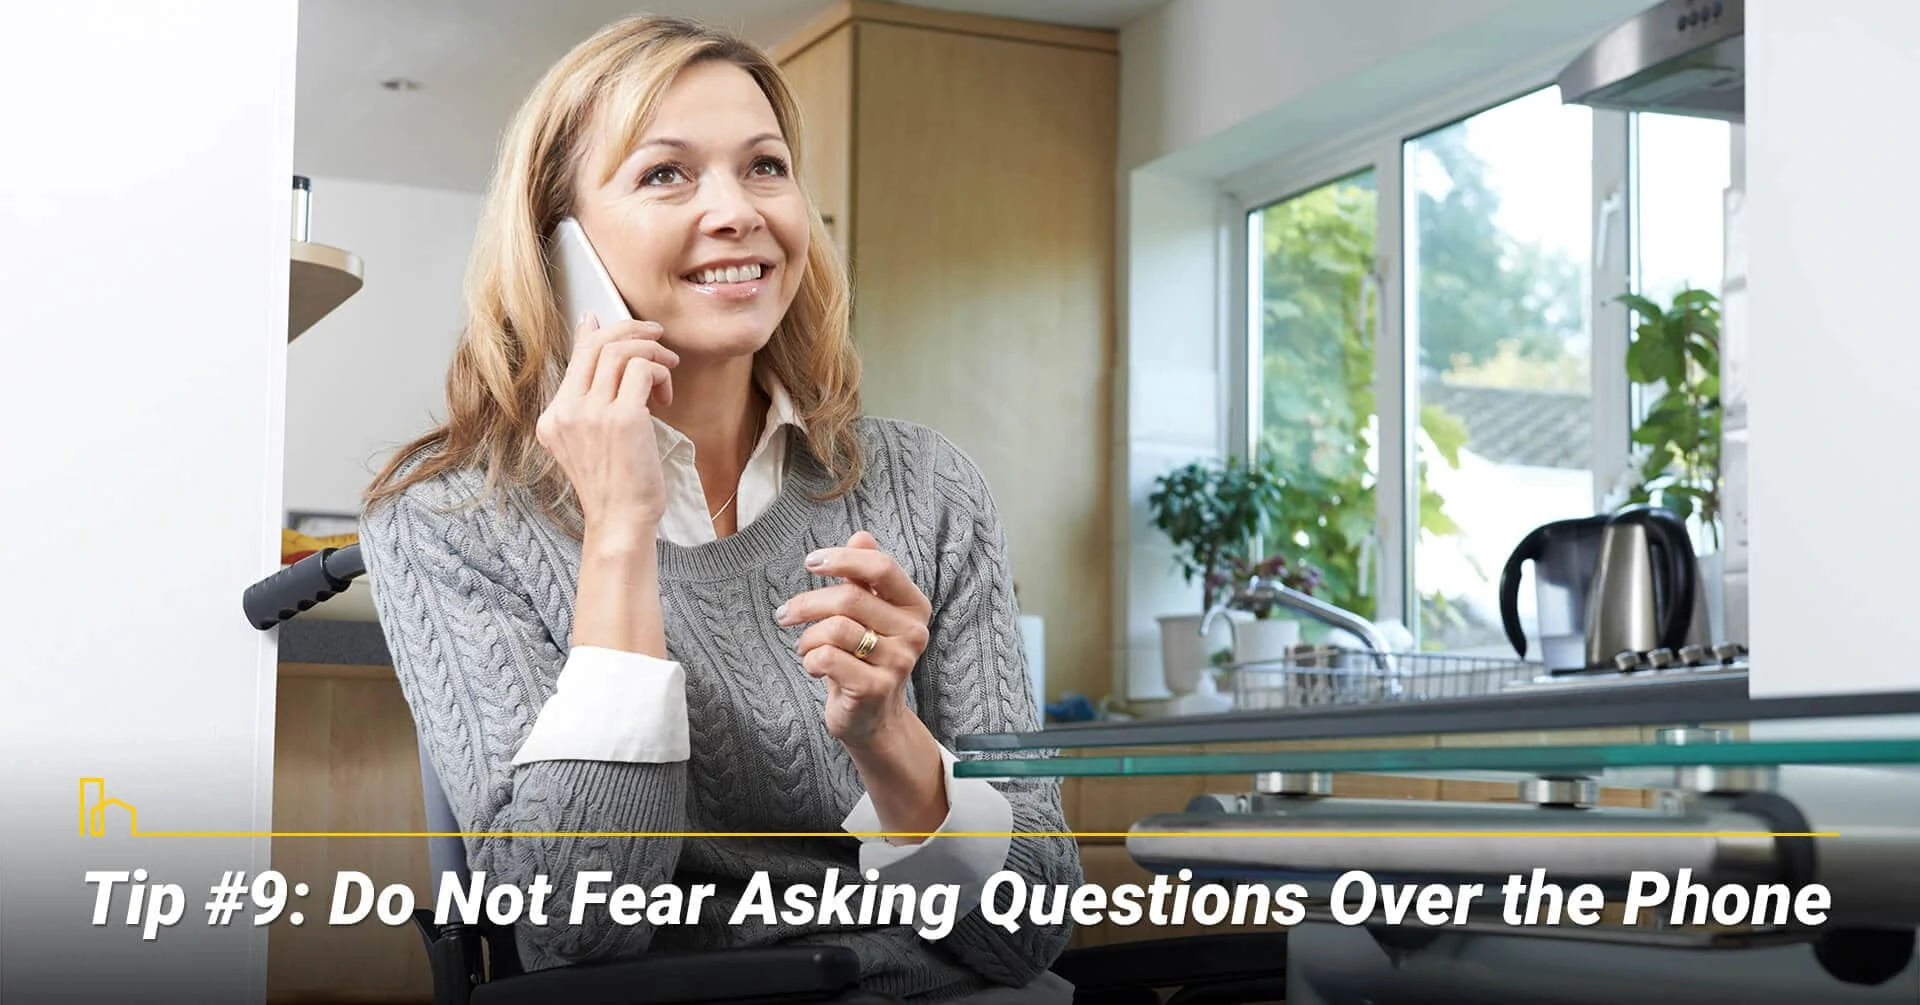 Tip #9: Do Not Fear Asking Questions Over the Phone, get your questions answered over the phone